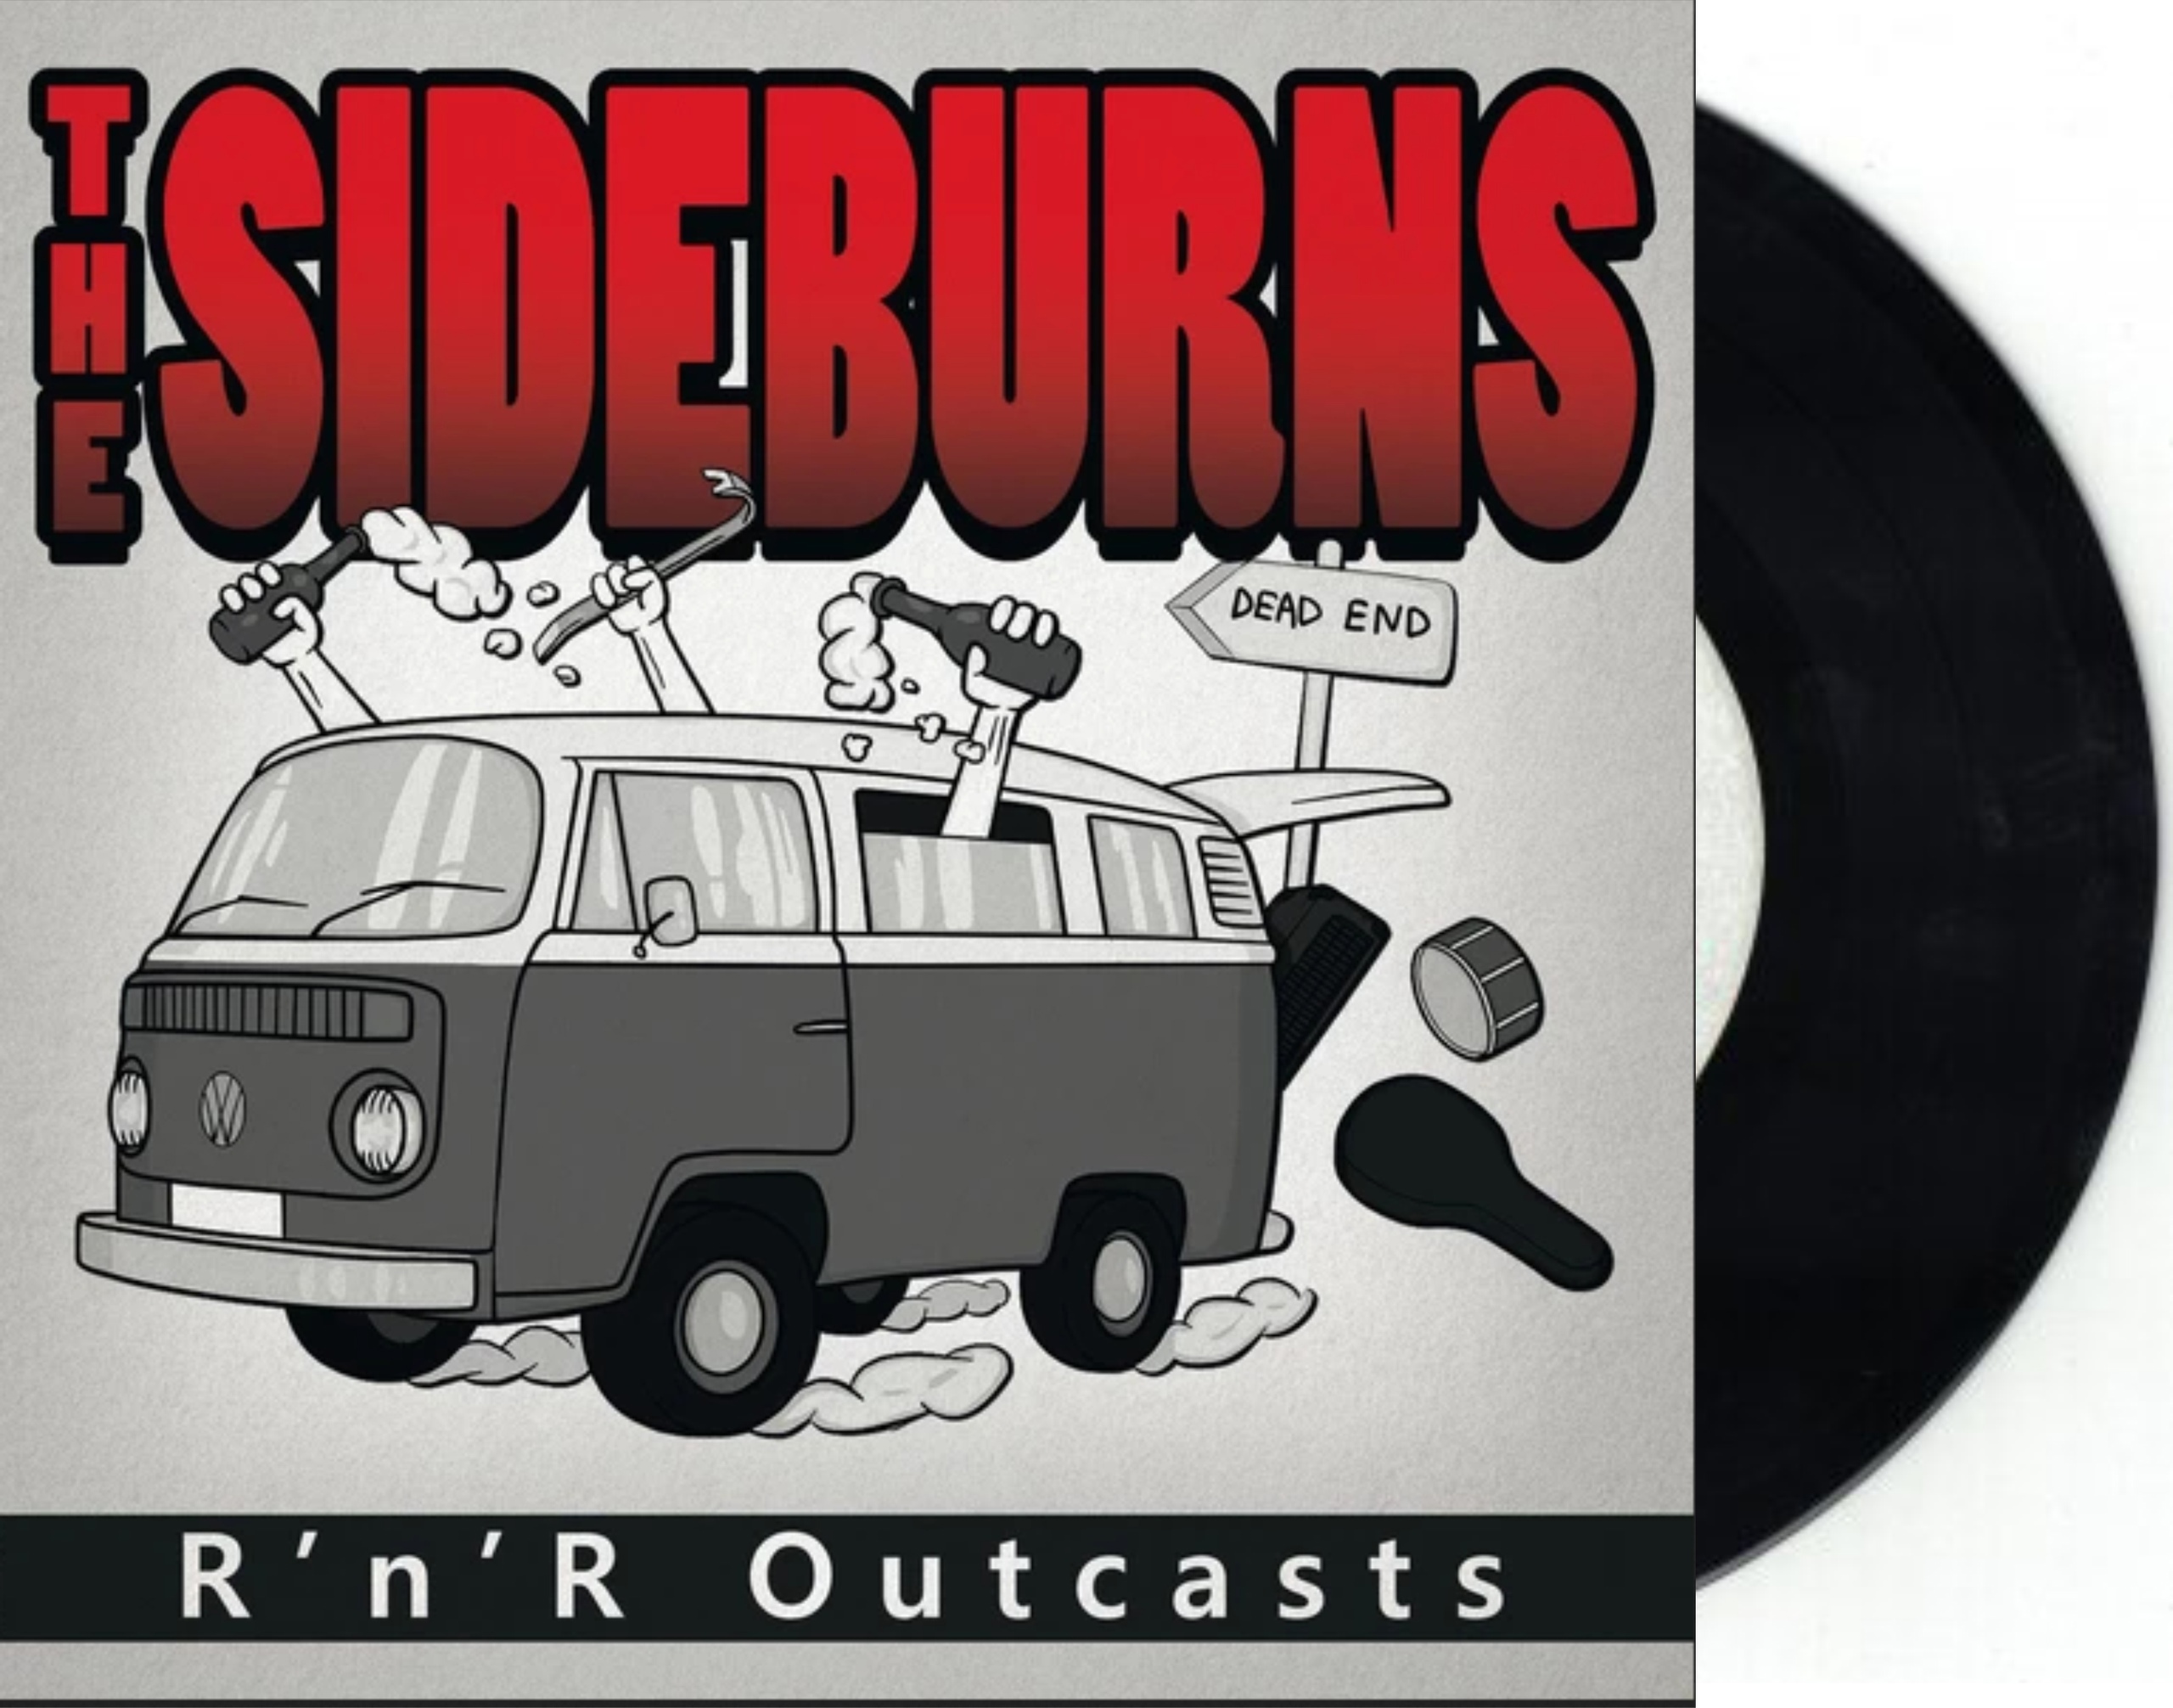 Sideburns (The) – R 'n' R Outcasts 7"